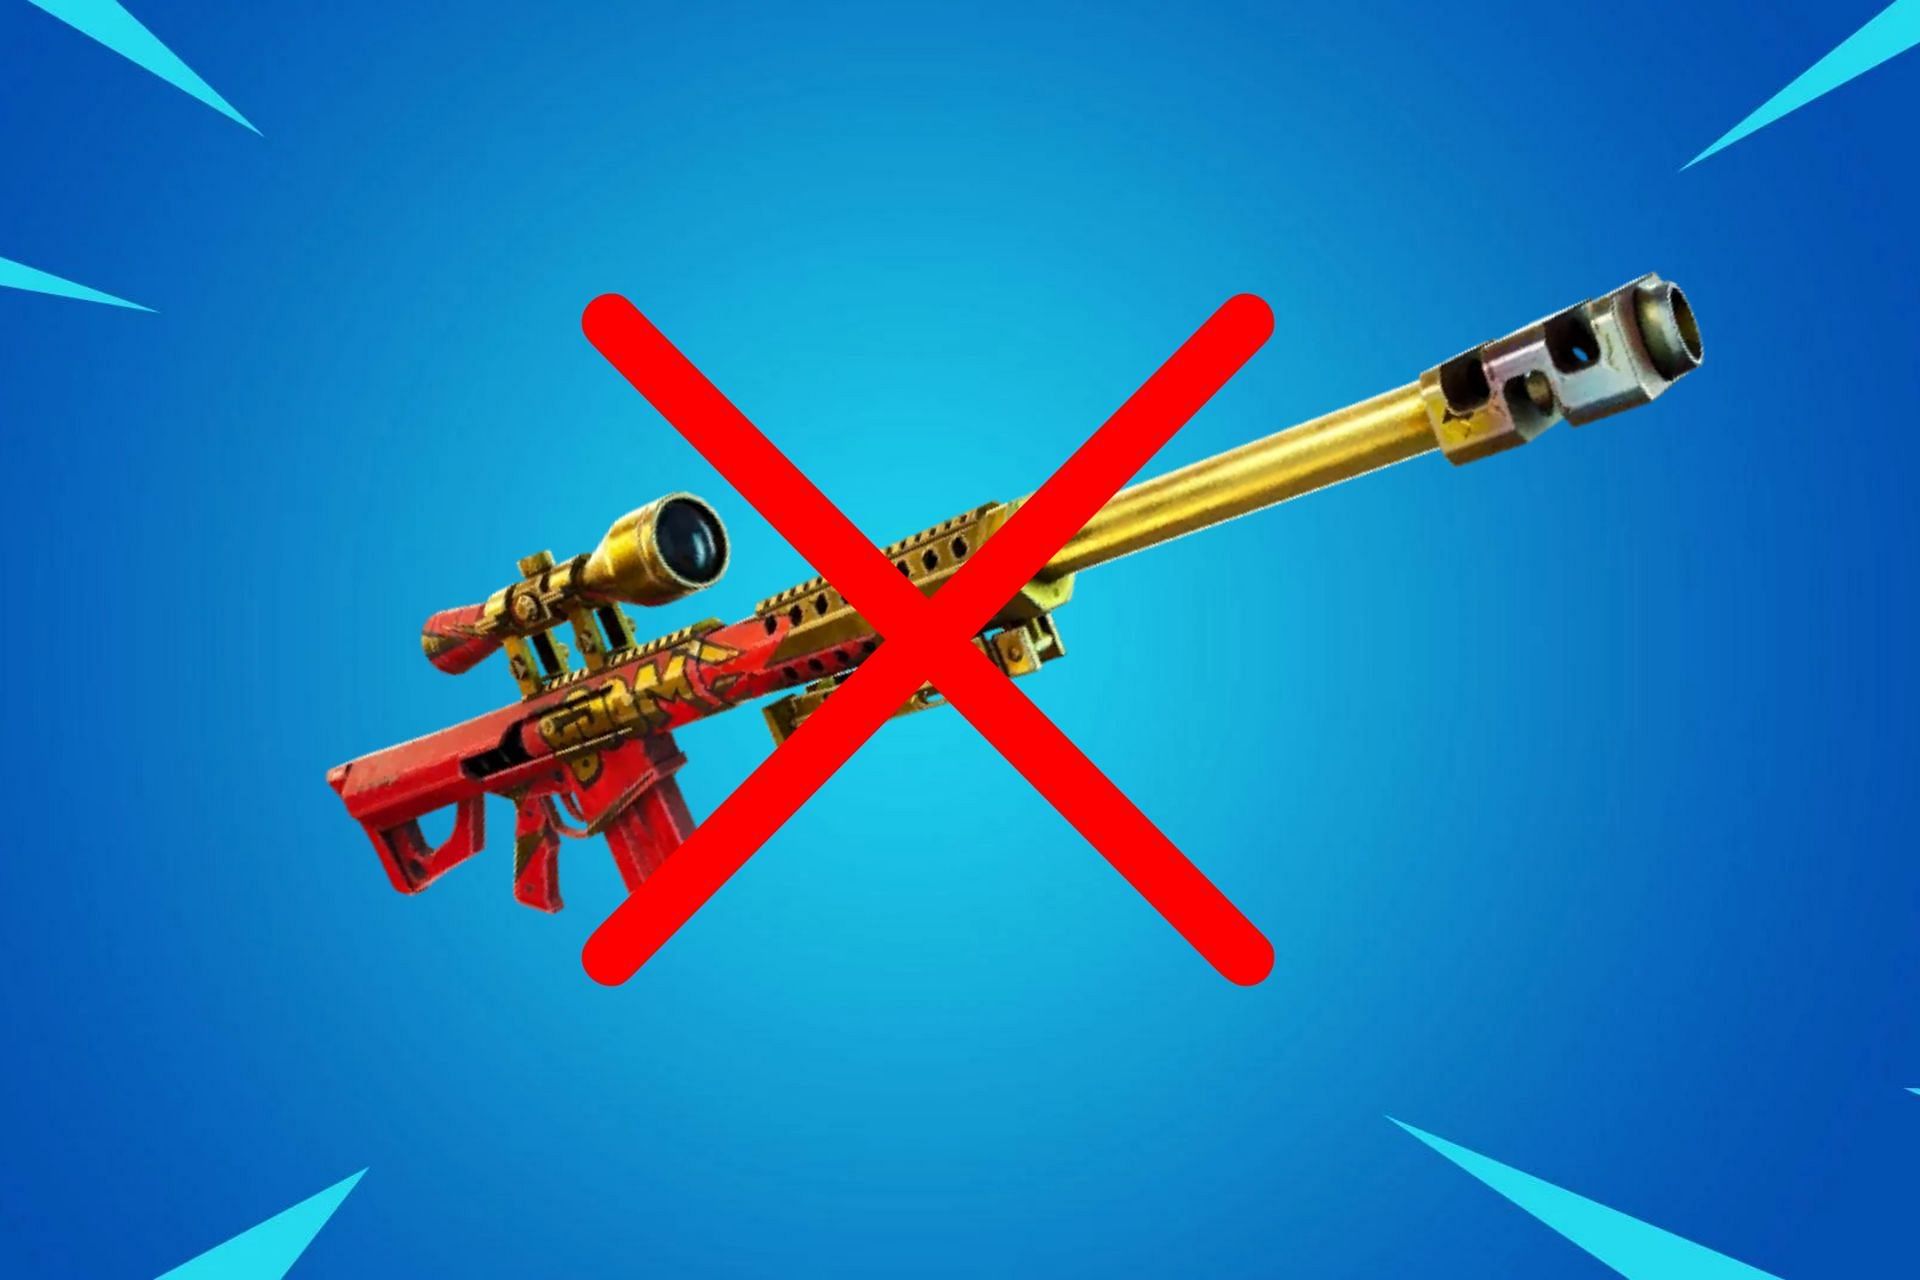 Fortnite player wants Epic Games to remove shooting from the game (Image via Sportskeeda)